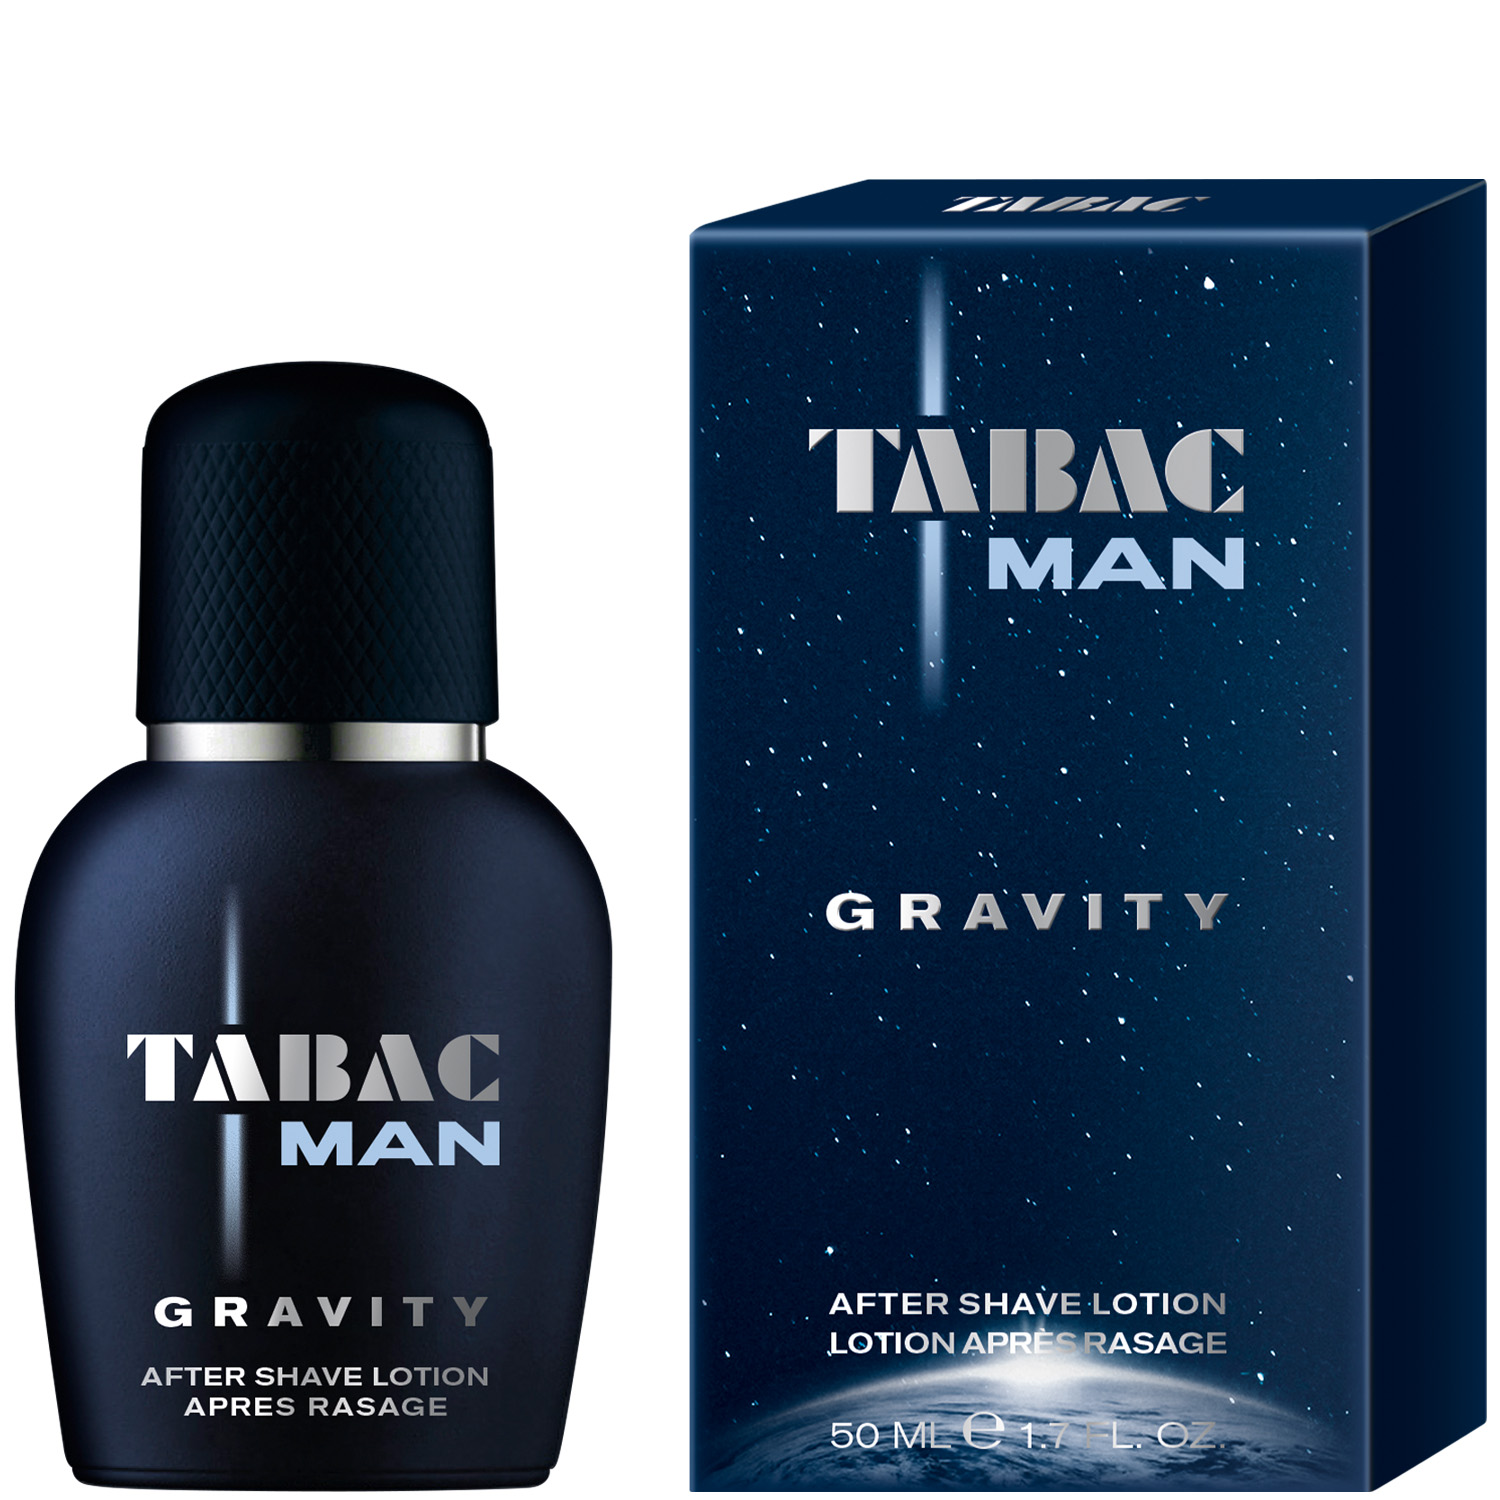 Tabac Man Gravity After Shave Lotion 50ml